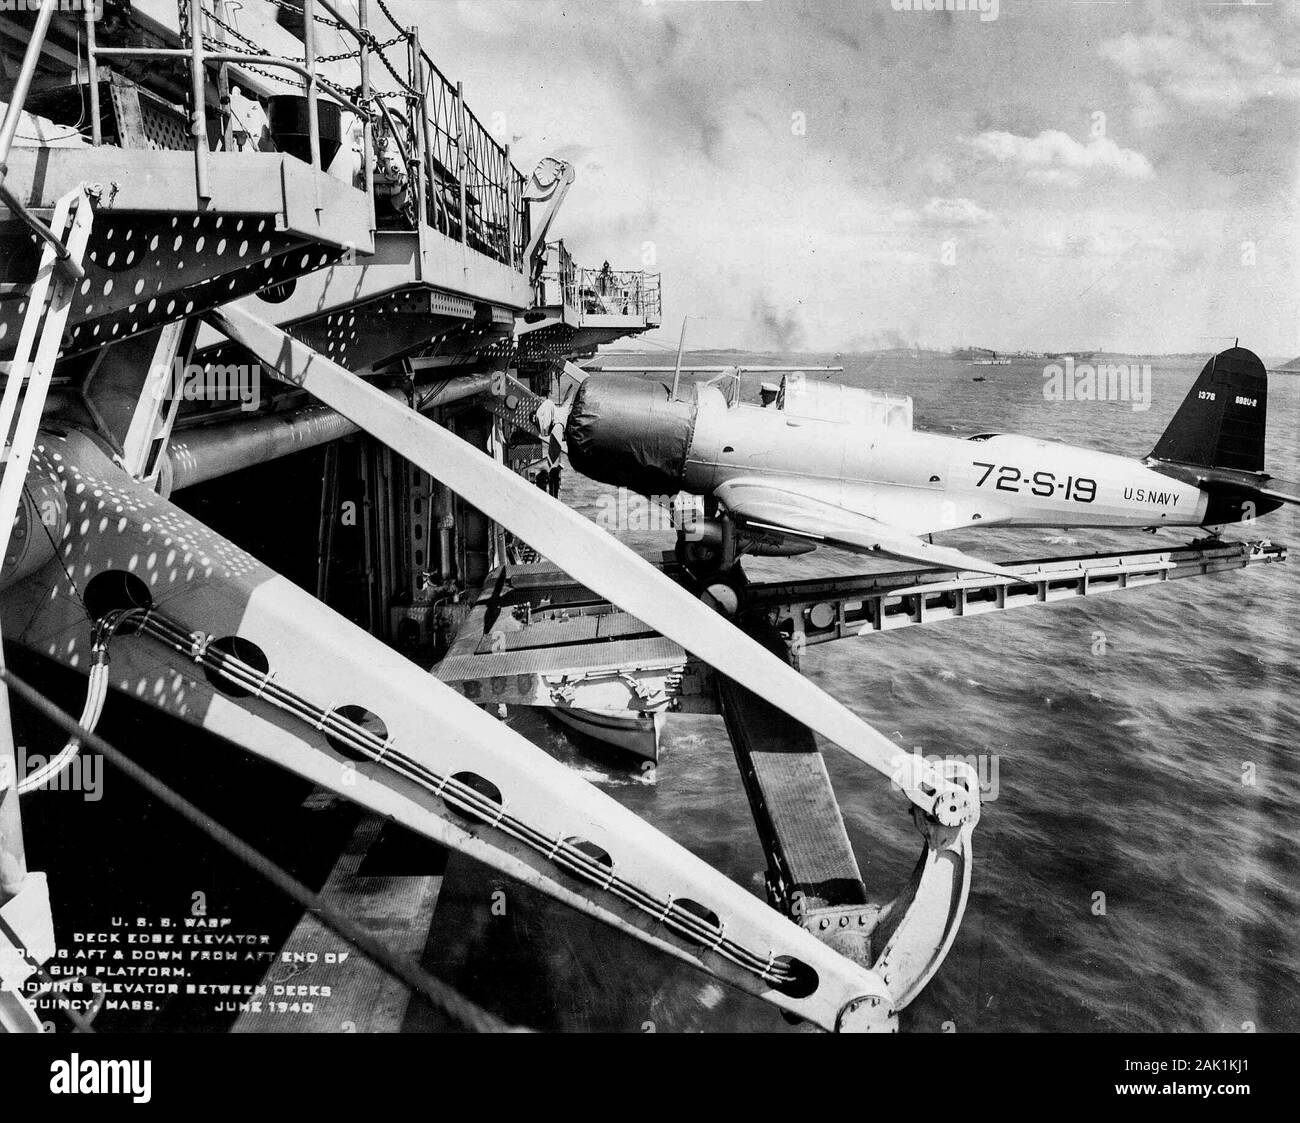 A U.S. Navy Vought SB2U-2 Vindicator (BuNo 1376) from scouting squadron VS-72 pictured on the deck edge elevator of the aircraft carrier USS Wasp (CV-7) at Quincy, Massachusetts (USA), in June 1940. The elevator consisted of a platform for the front wheels and an outrigger for the tail wheel. The two arms on the sides moved the platform in a half-circle up and down between the flight deck and the hangar deck. Stock Photo